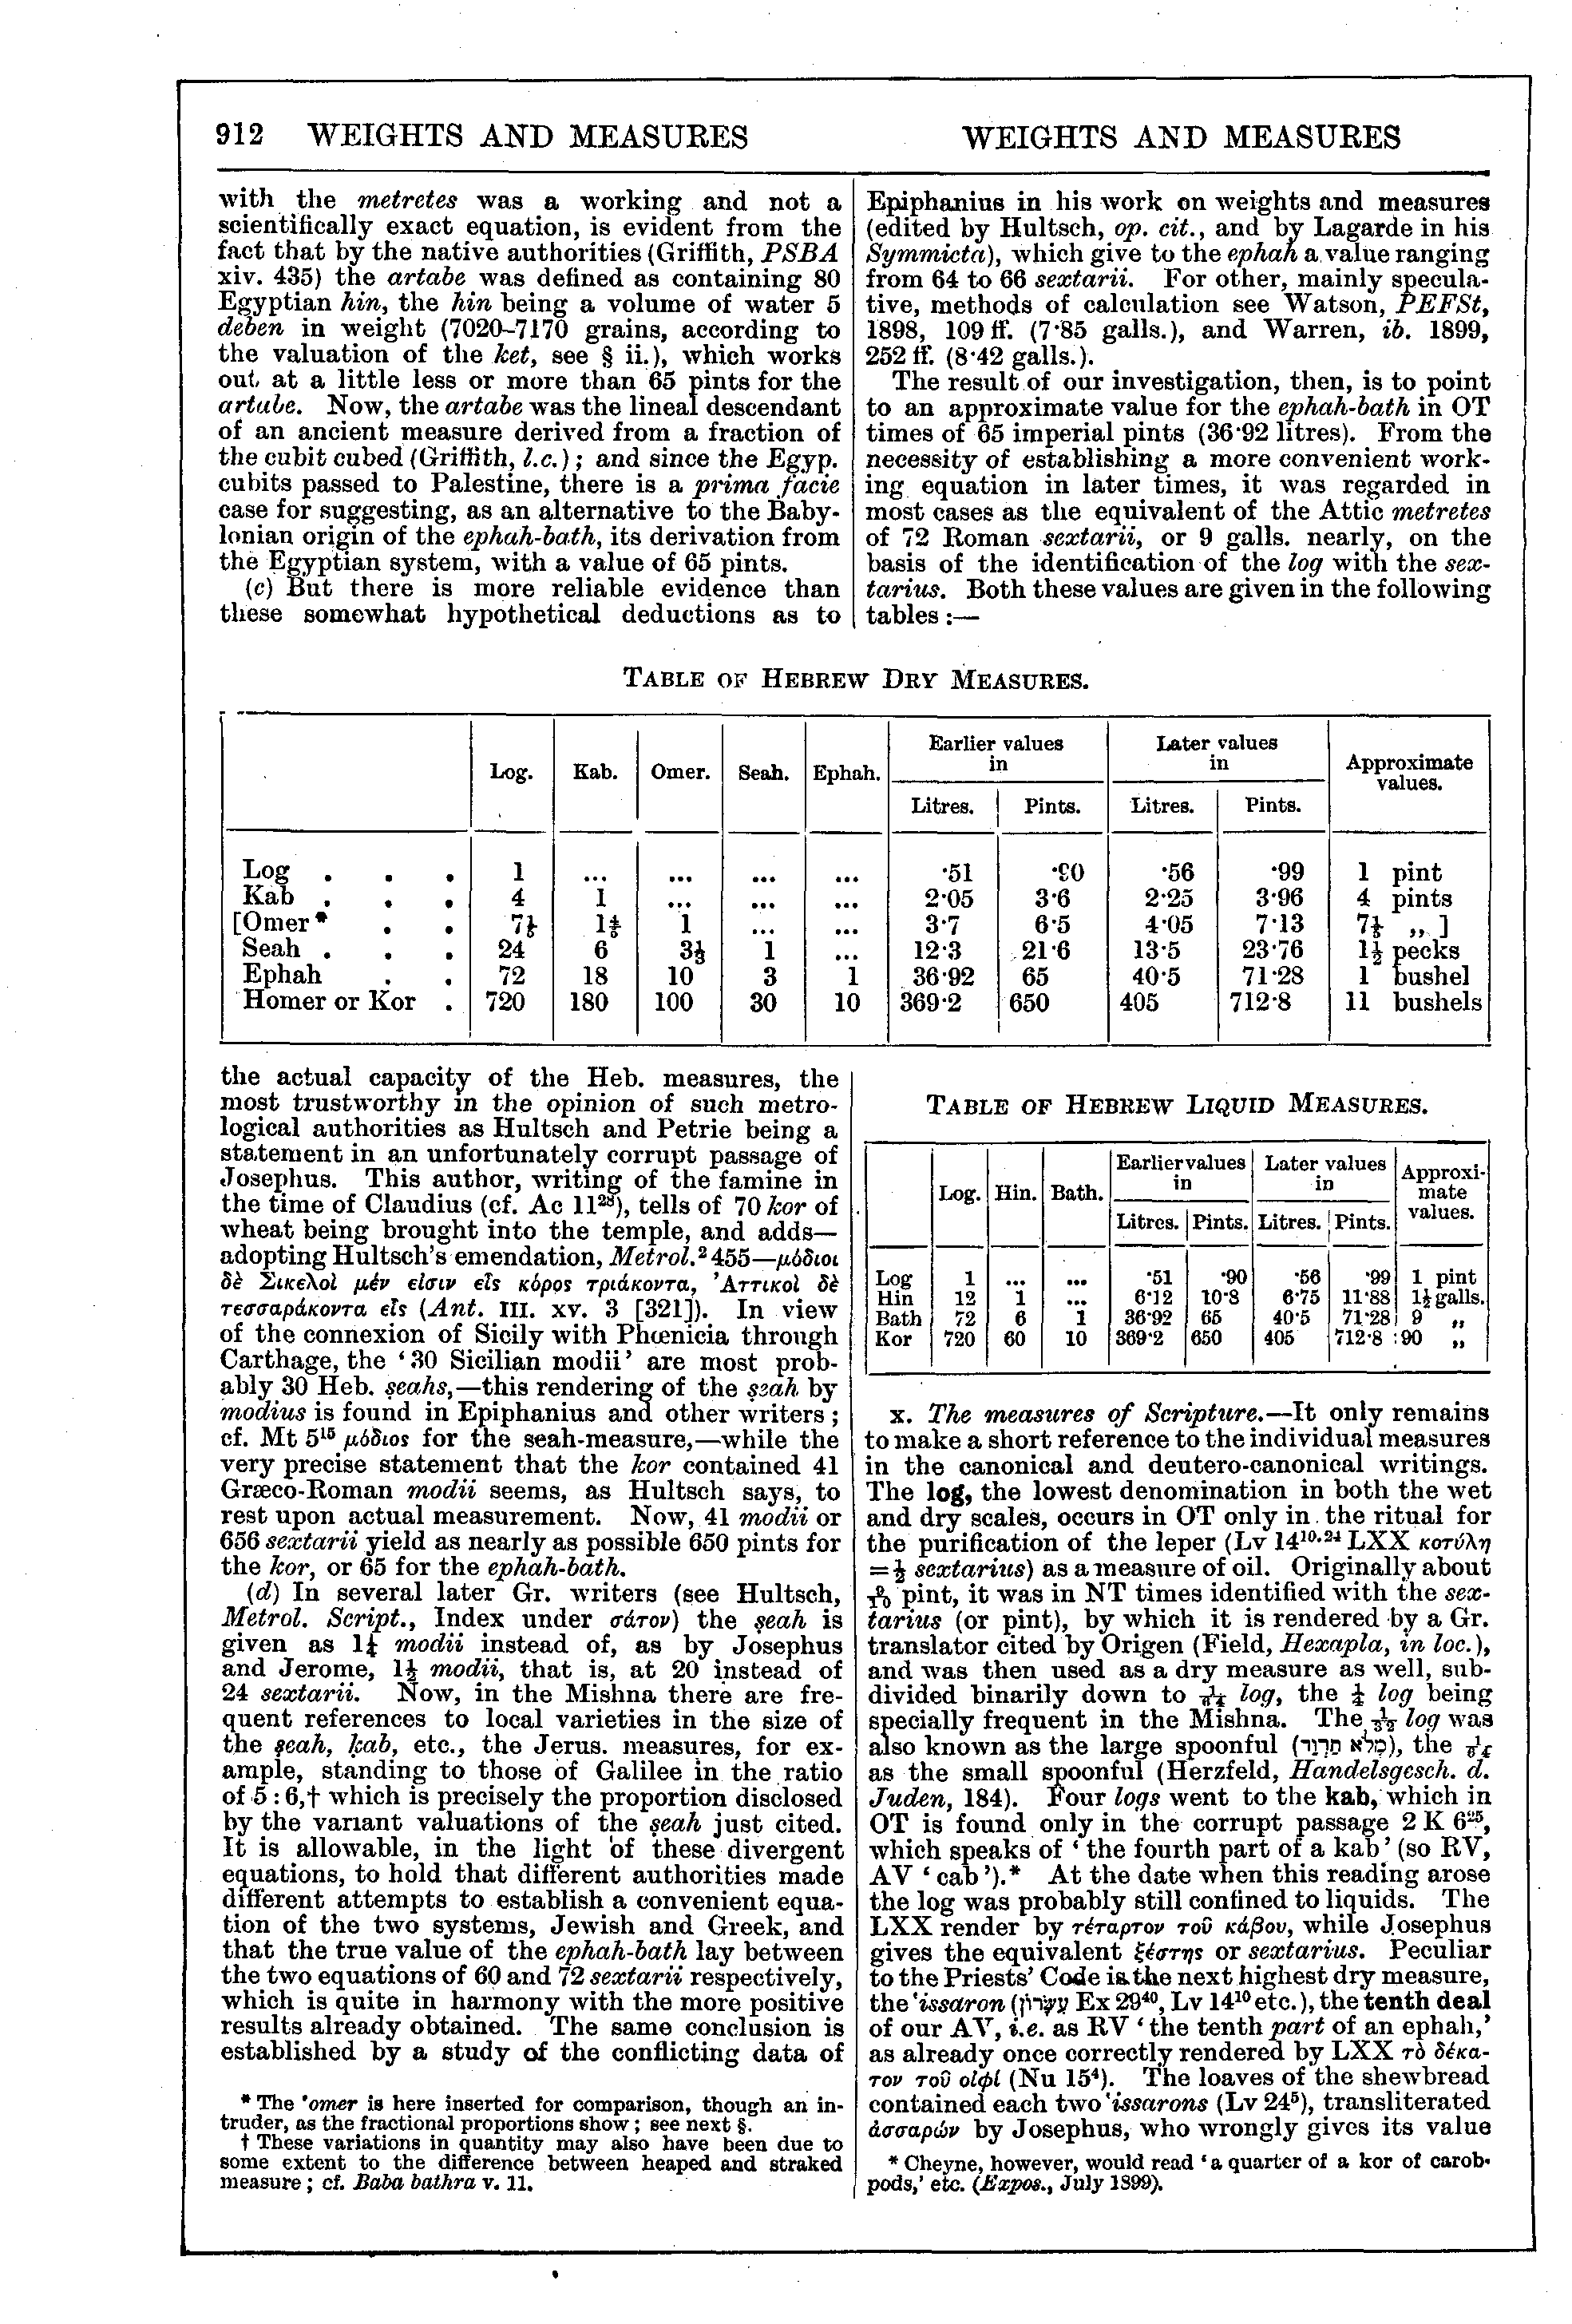 Image of page 912